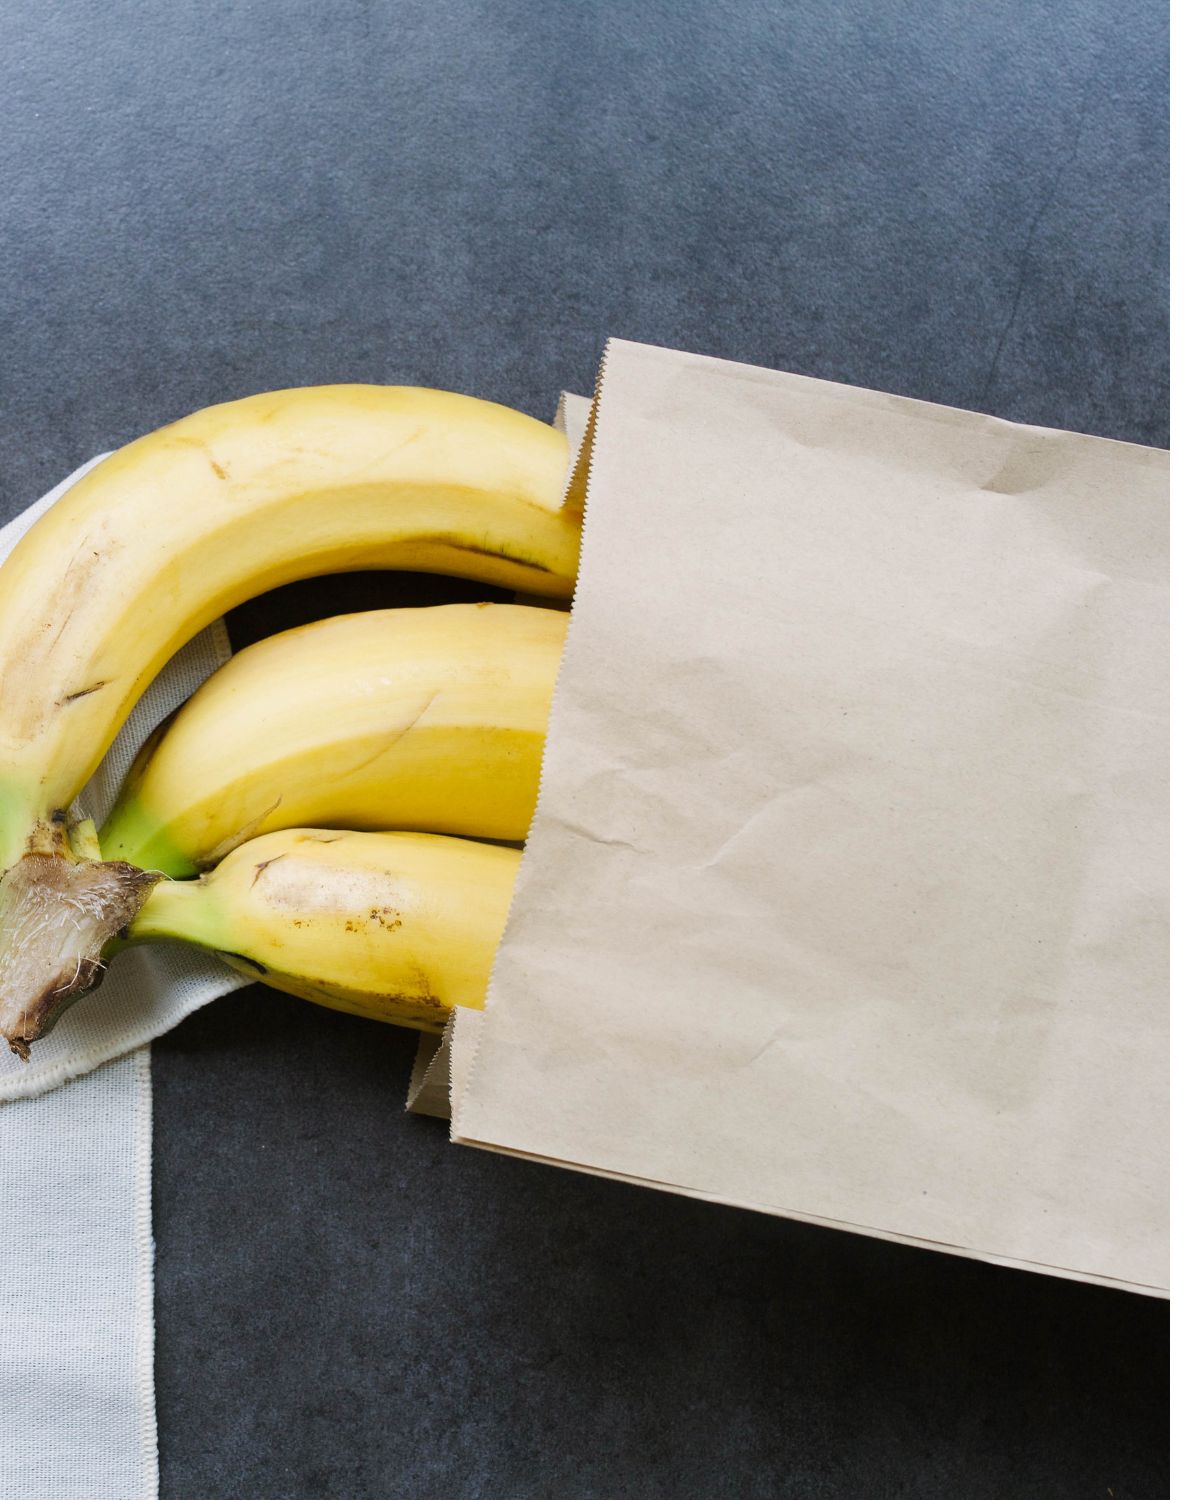 How to ripen green bananas in a paper bag.